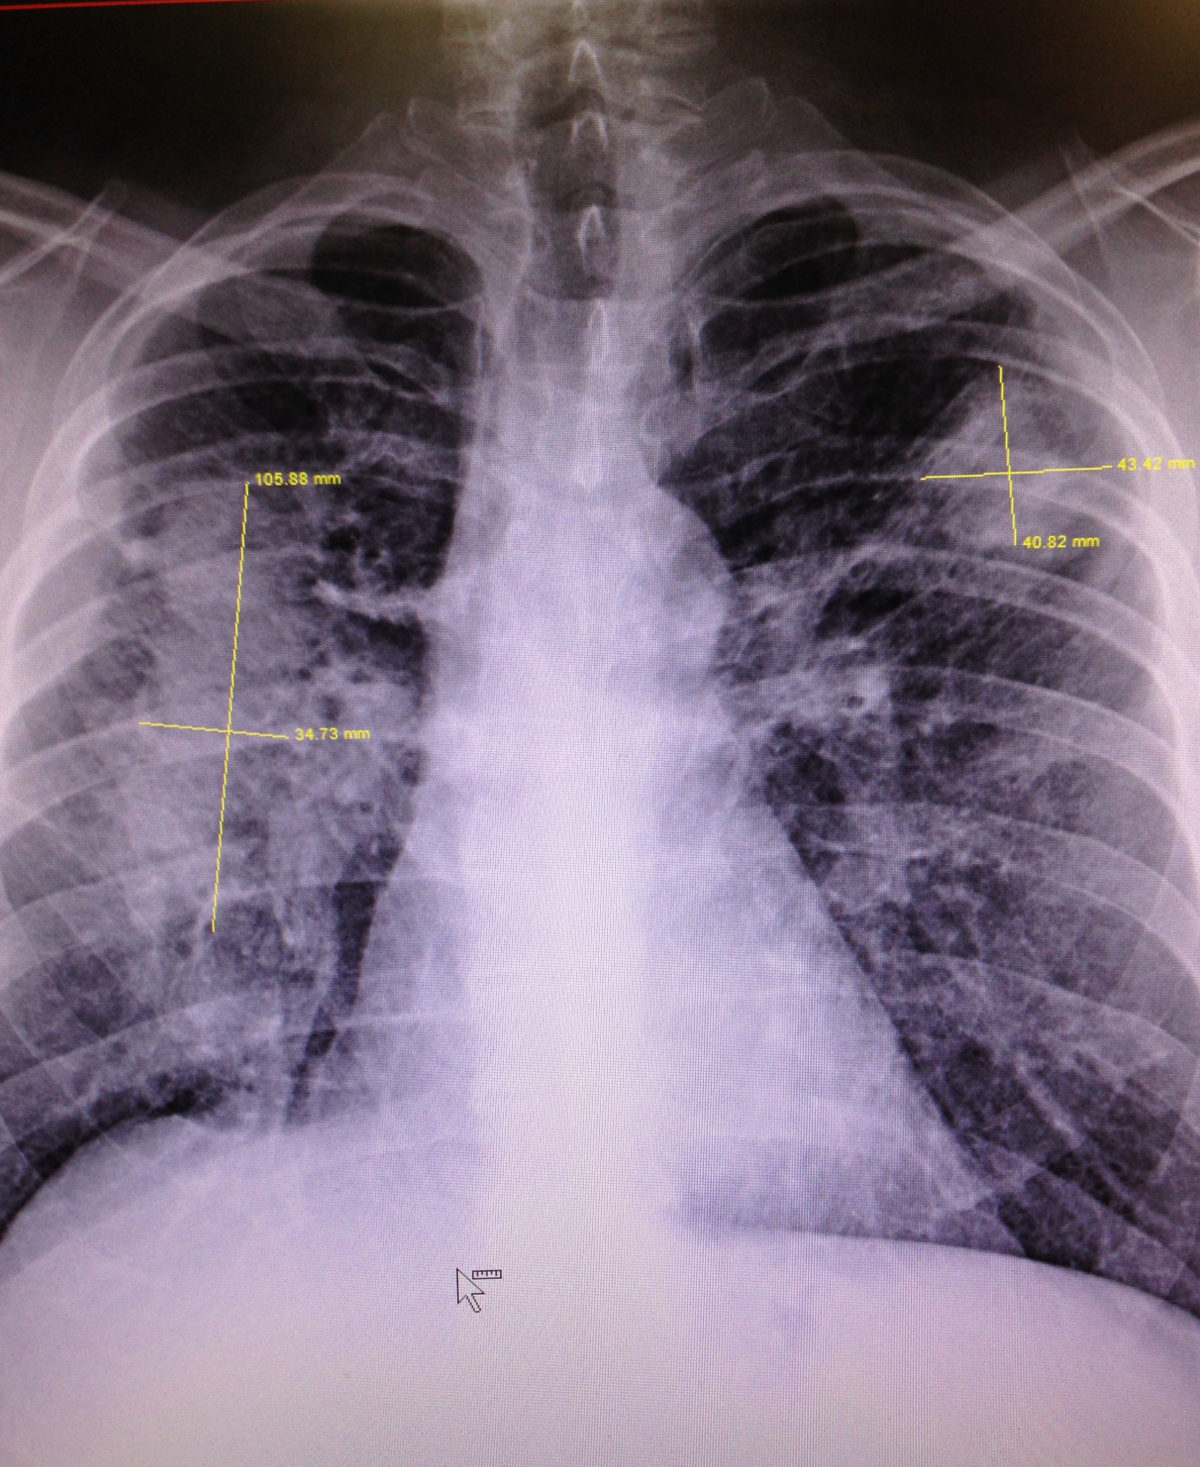 Forehand Lung with opacities outlined (1)